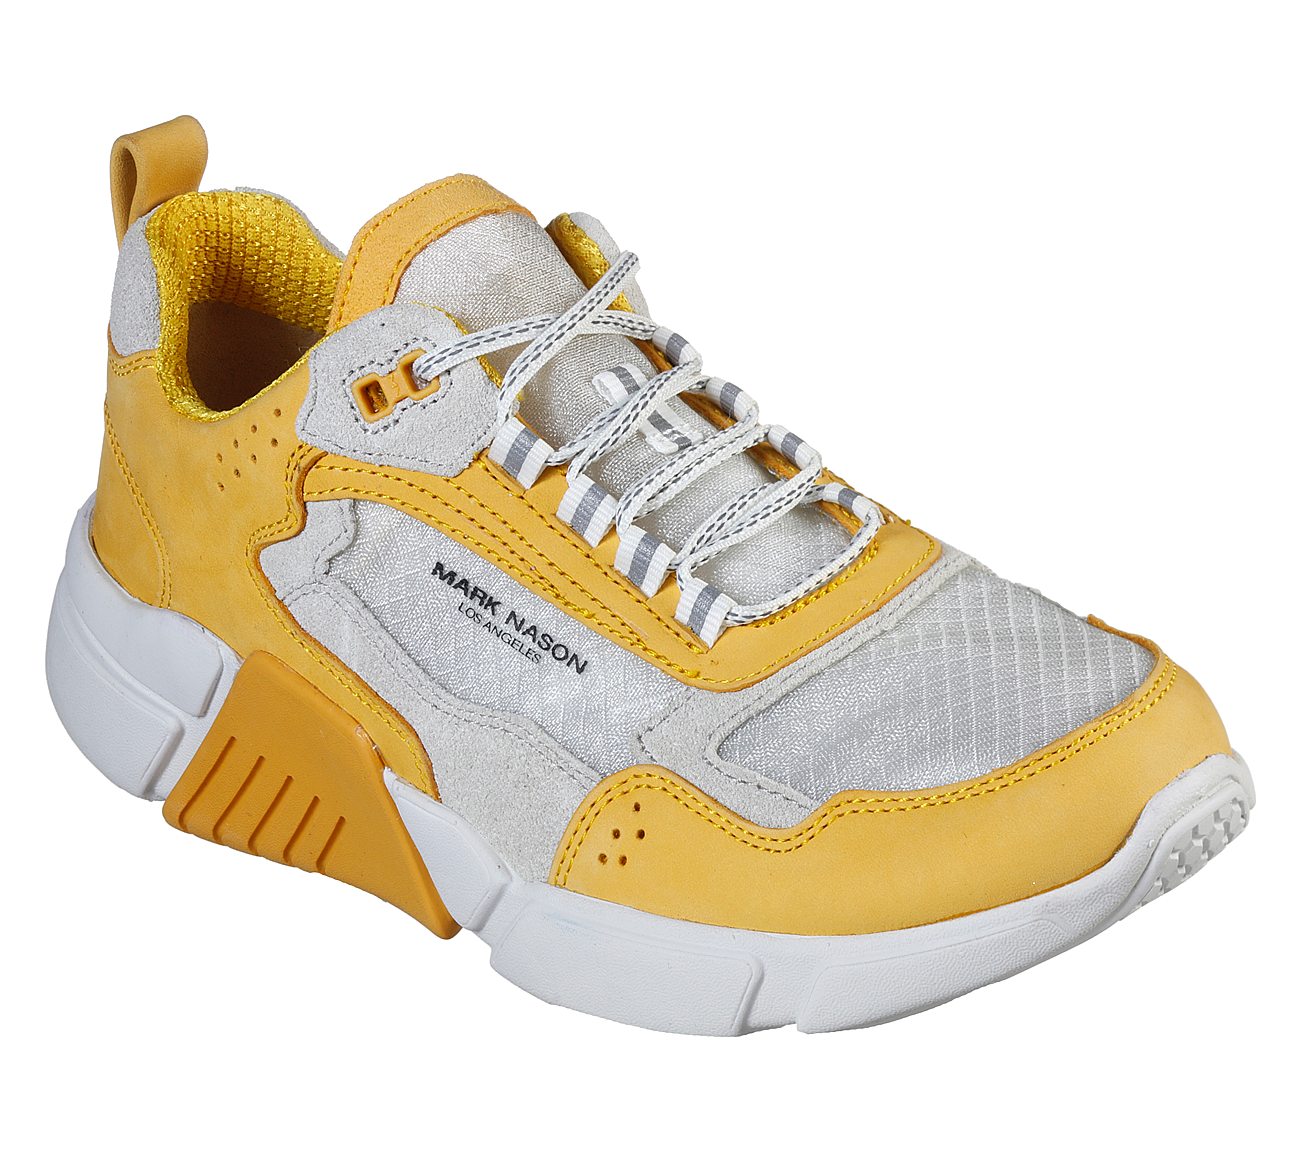 BLOCK - WEST, YELLOW/WHITE Footwear Lateral View